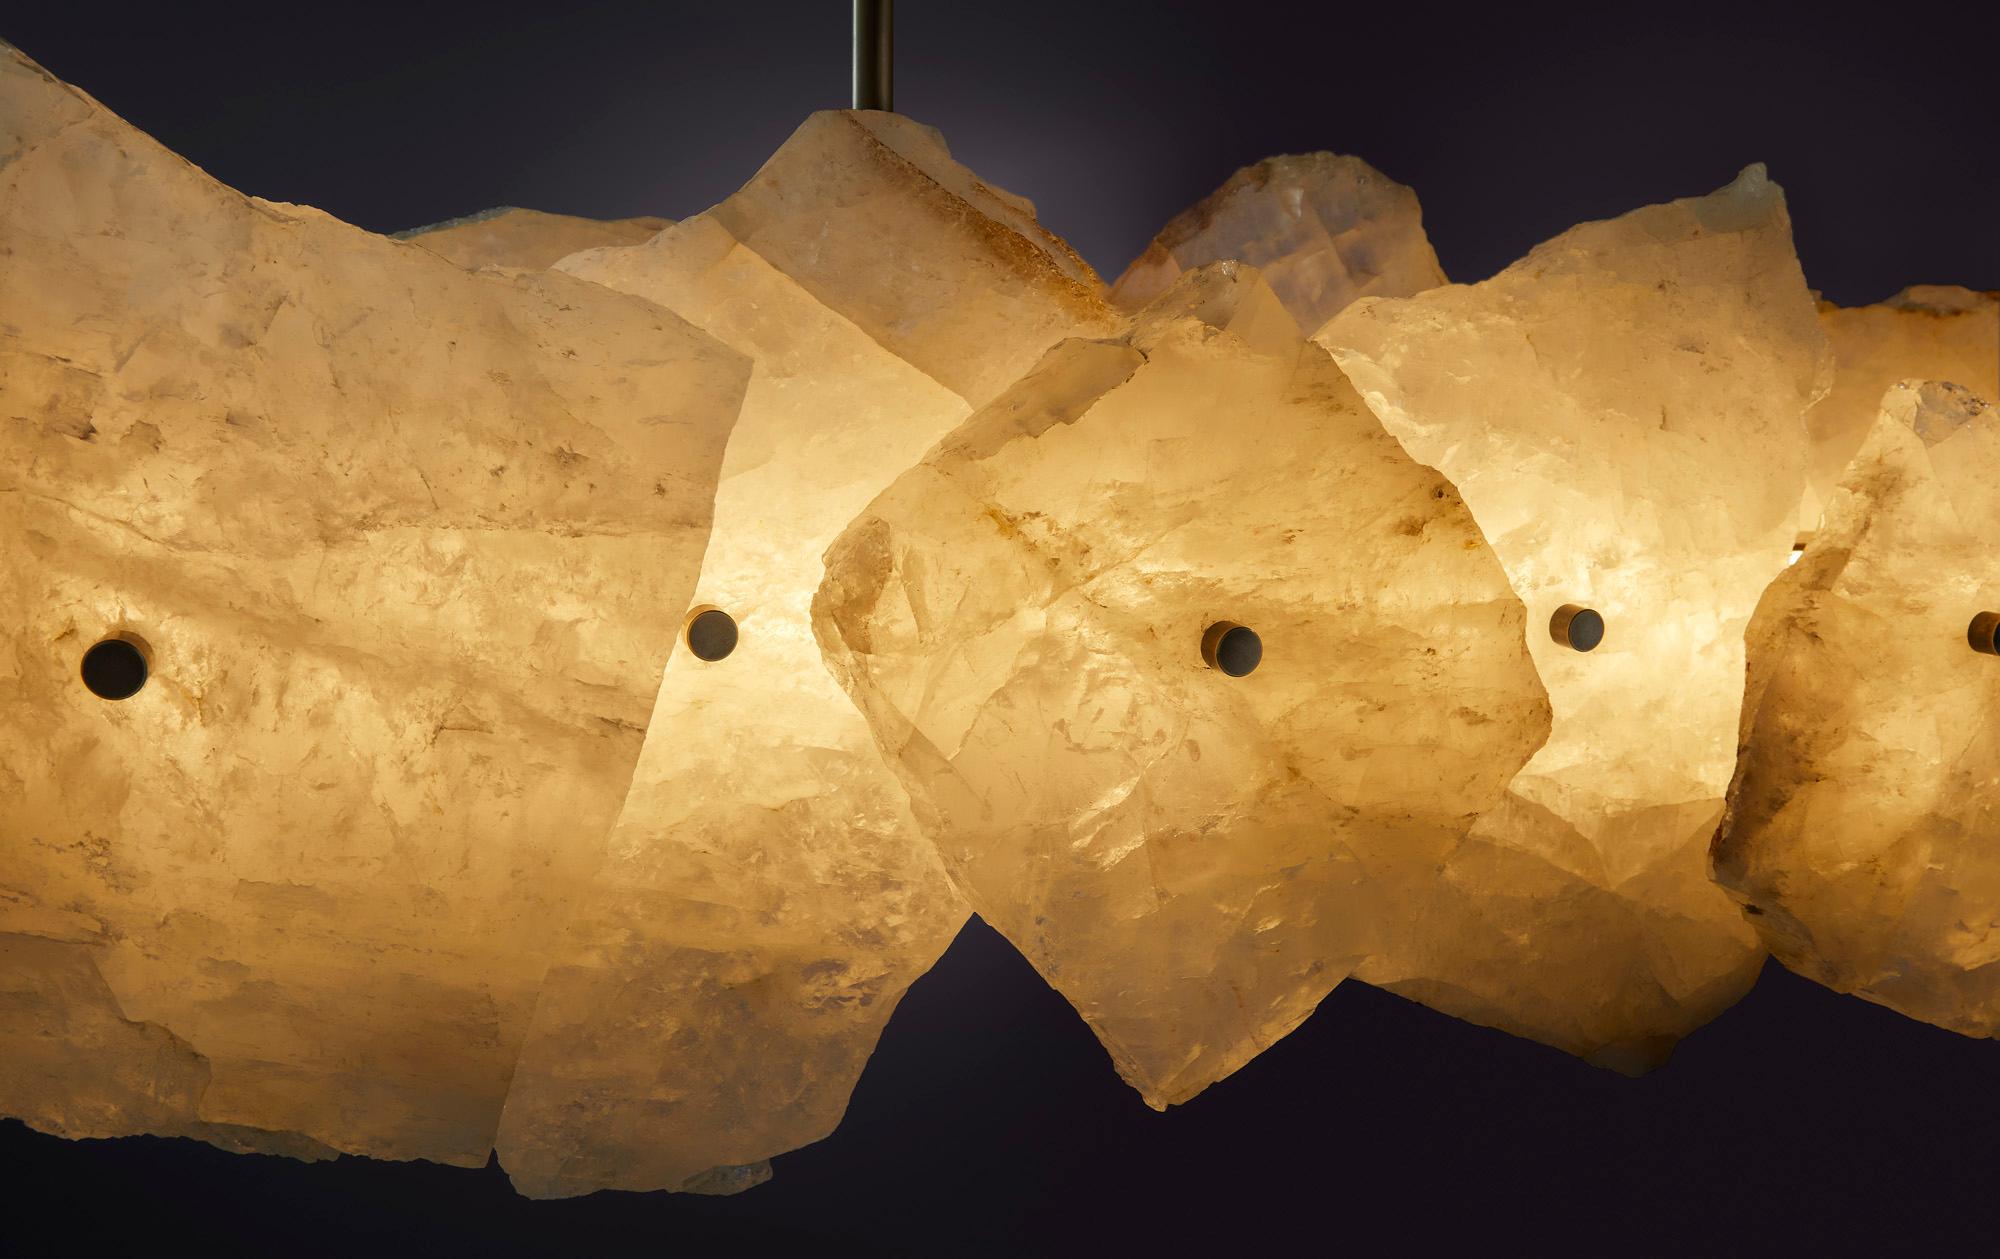 Petra (from the Greek word ??t?a, meaning stone) celebrates the complexity and subtleties in the material composition in Quartz that Petra is made from. Evoking strong connections to deep earth geology, Petra radiates light through subtle tones and